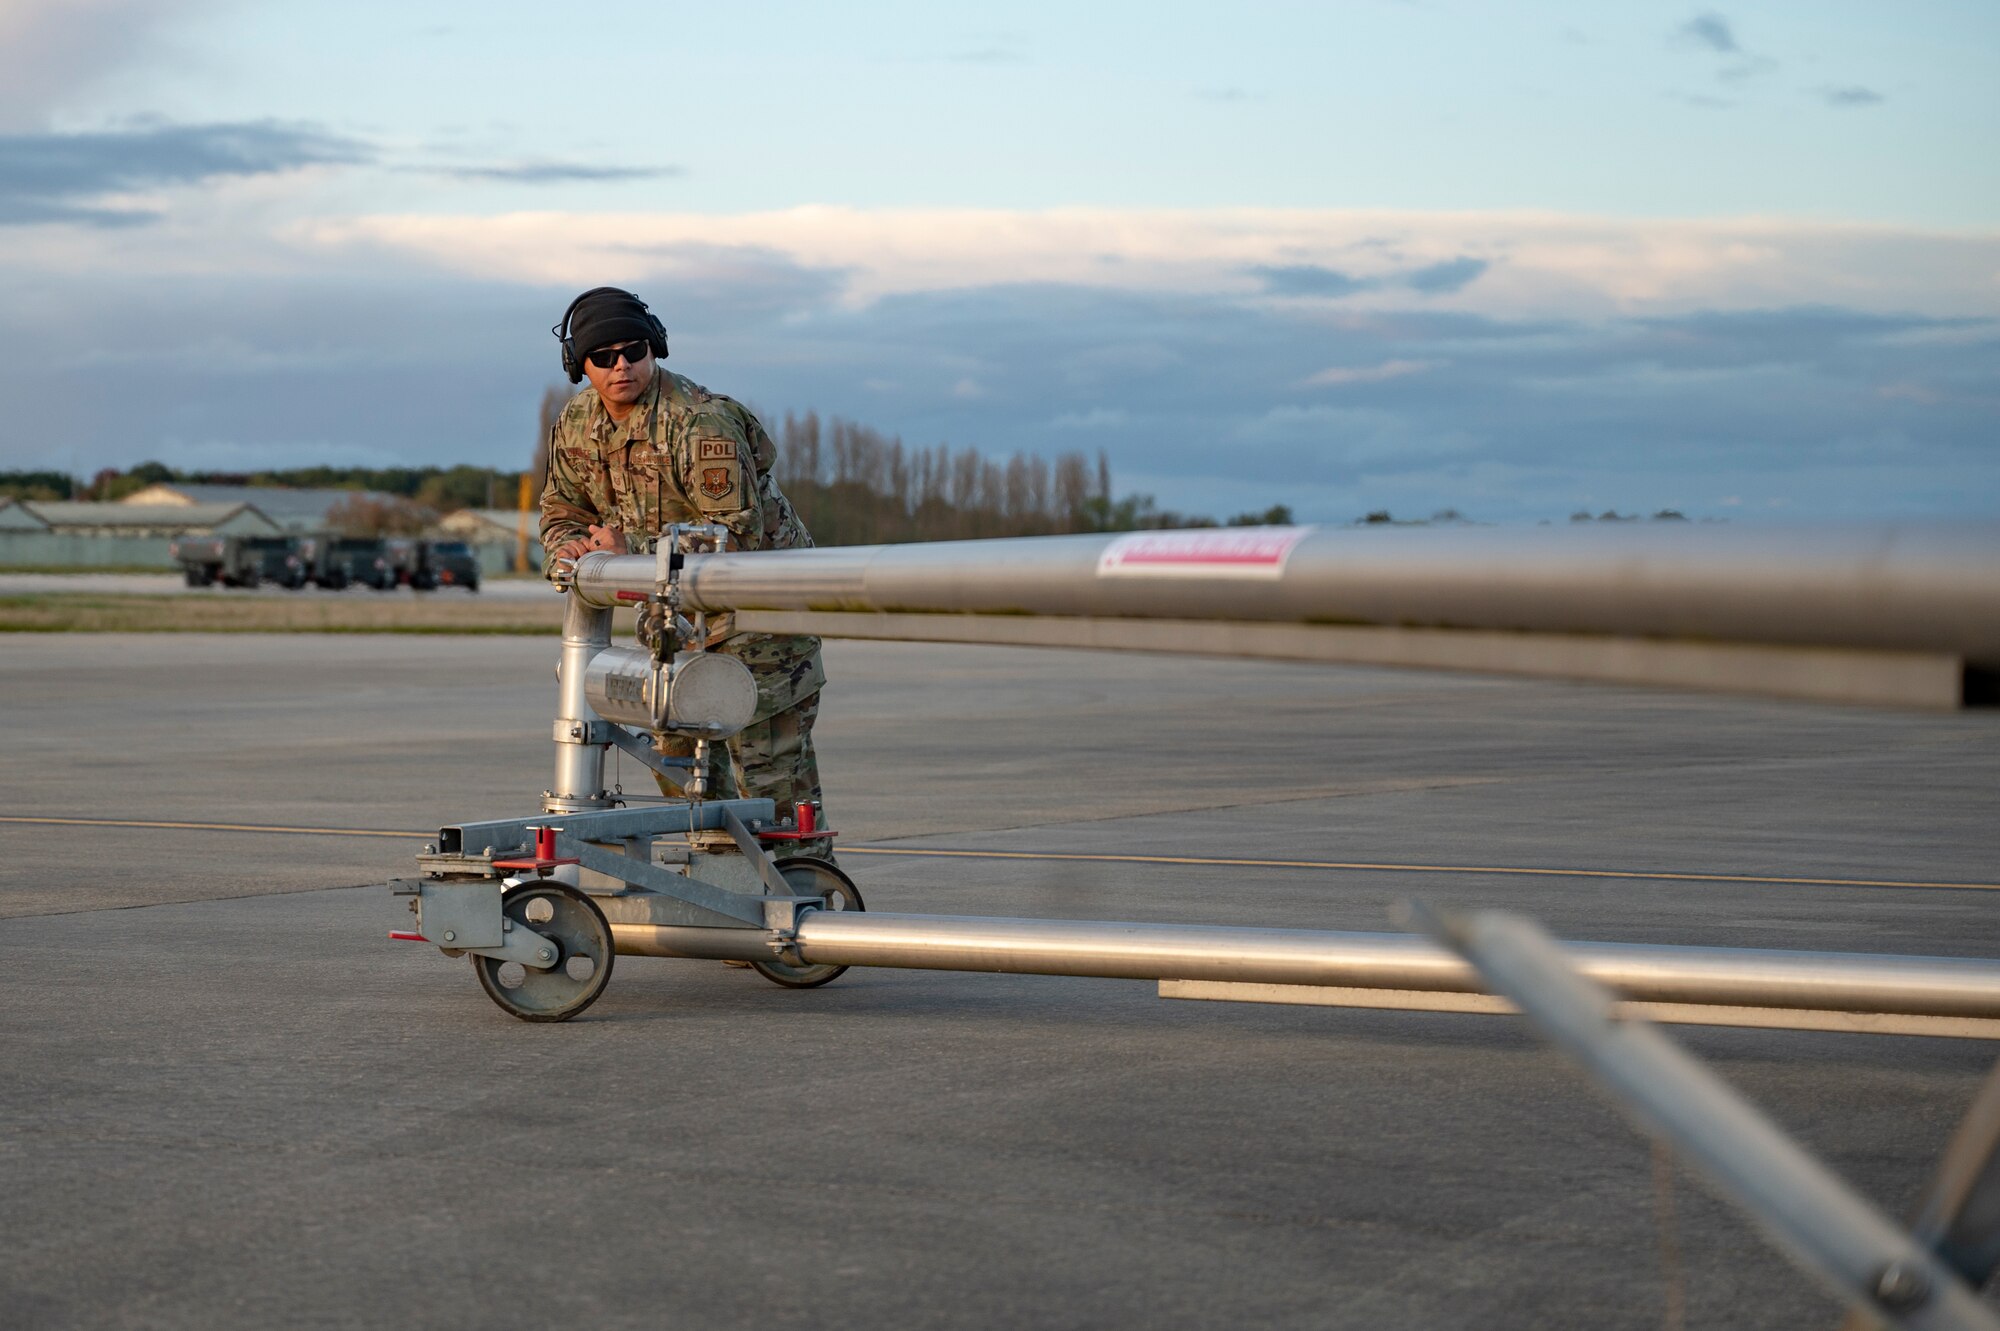 Tech. Sgt. Robert Duarte, 9th Expeditionary Bomb Squadron fuels distribution operator, performs hot pit refueling on a B-1B Lancer at RAF Fairford, United Kingdom, Oct. 27, 2023. The team was using a pantograph for the continuous transport of fuel instead of utilizing fuel trucks, decreasing the time required to refuel. (U.S. Air Force photo by Airman 1st Class Emma Anderson)